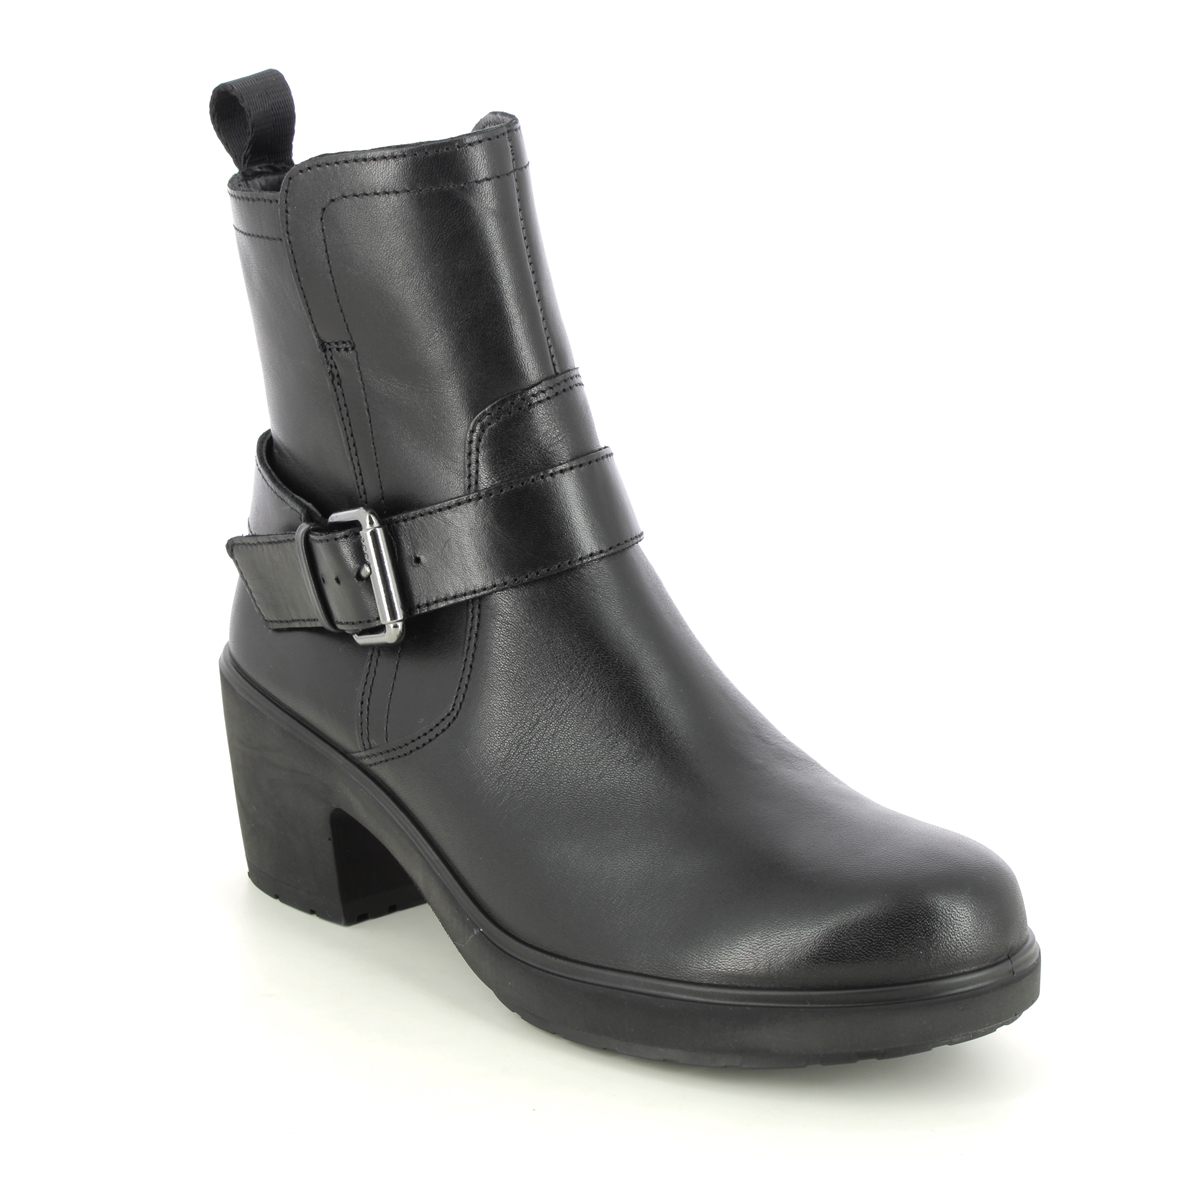 Ecco Zurich Tex Metropole Black Leather Womens Ankle Boots 222203-01001 In Size 38 In Plain Black Leather